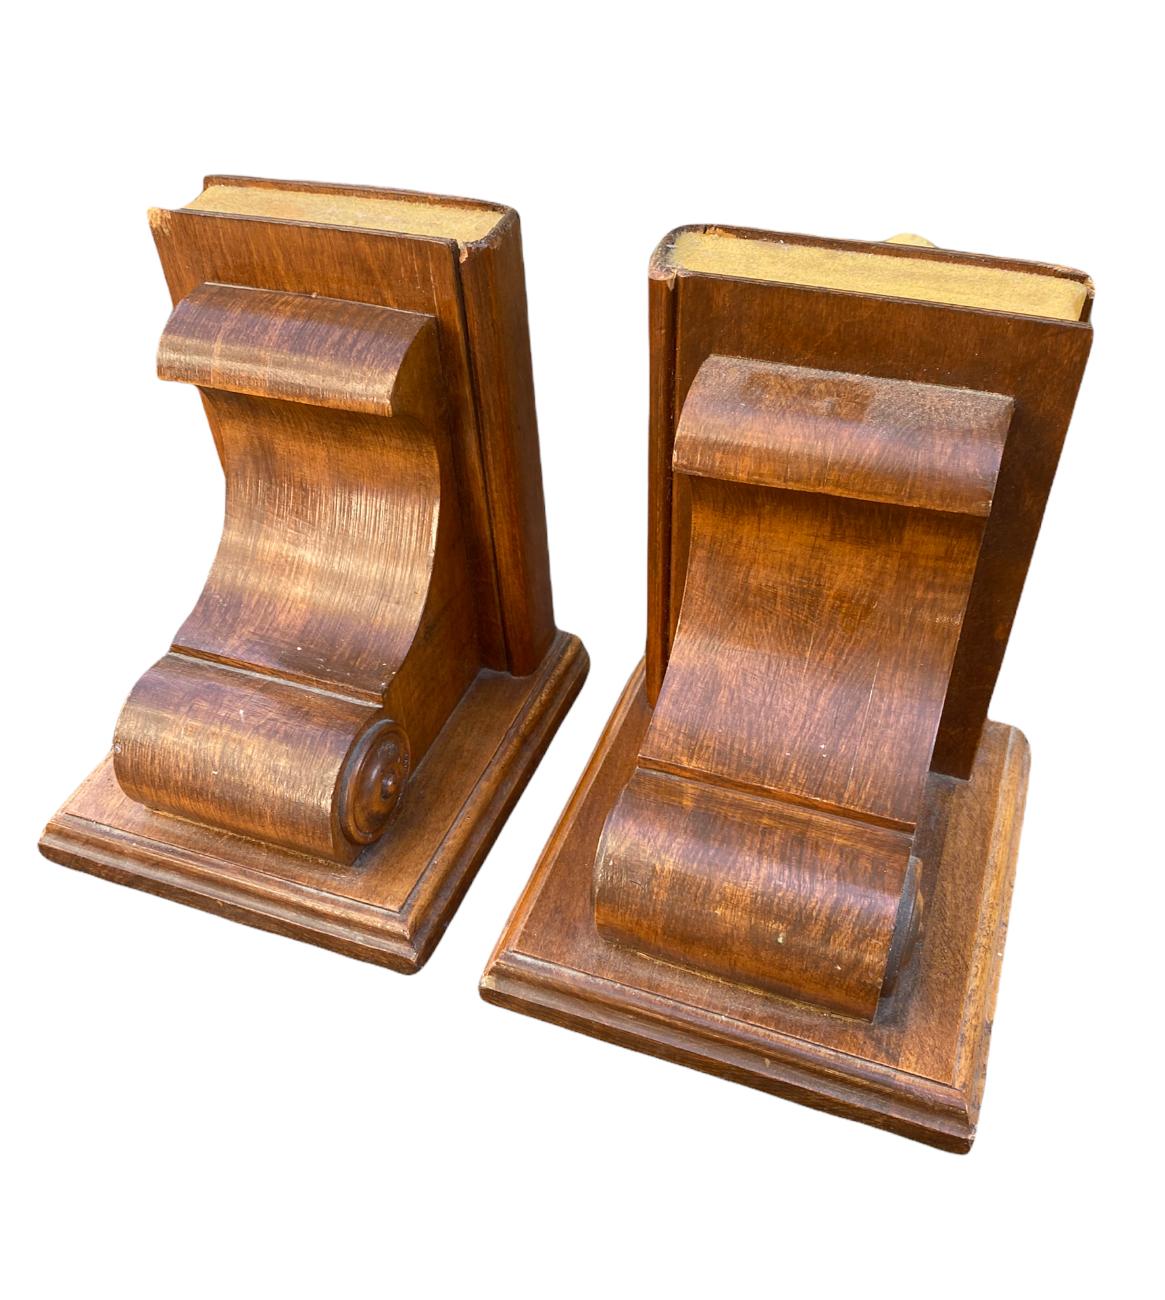 Antique Bookends with Academic Motif 1